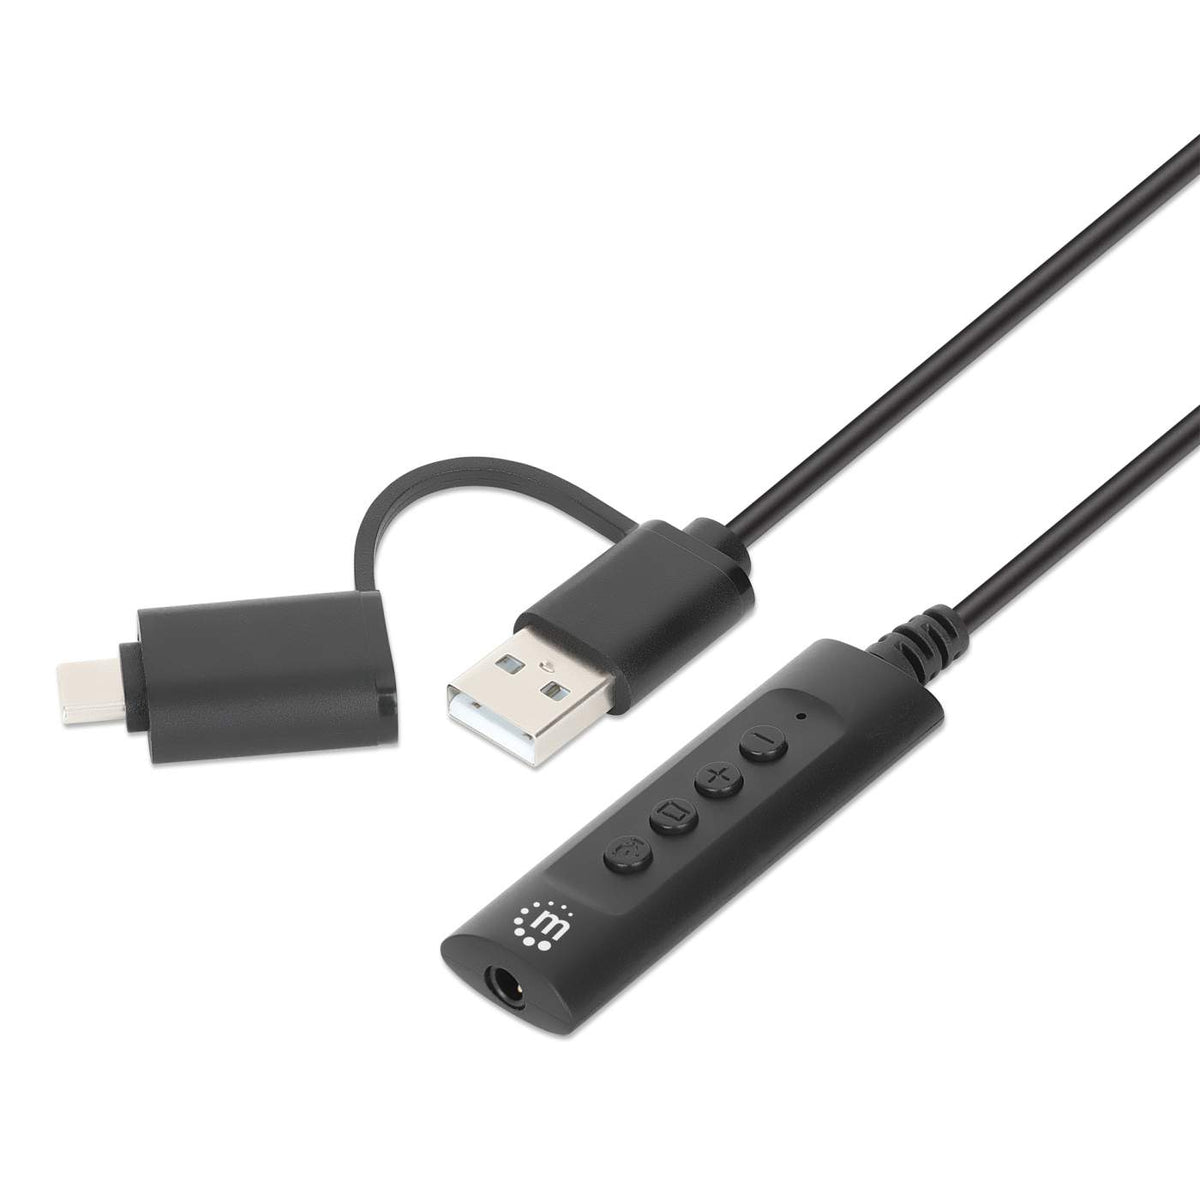 http://manhattanproducts.eu/cdn/shop/products/2-in-1-usb-c-usb-a-to-35-mm-stereo-audio-aux-adapter-cable-153560-1_1200x1200.jpg?v=1678747337